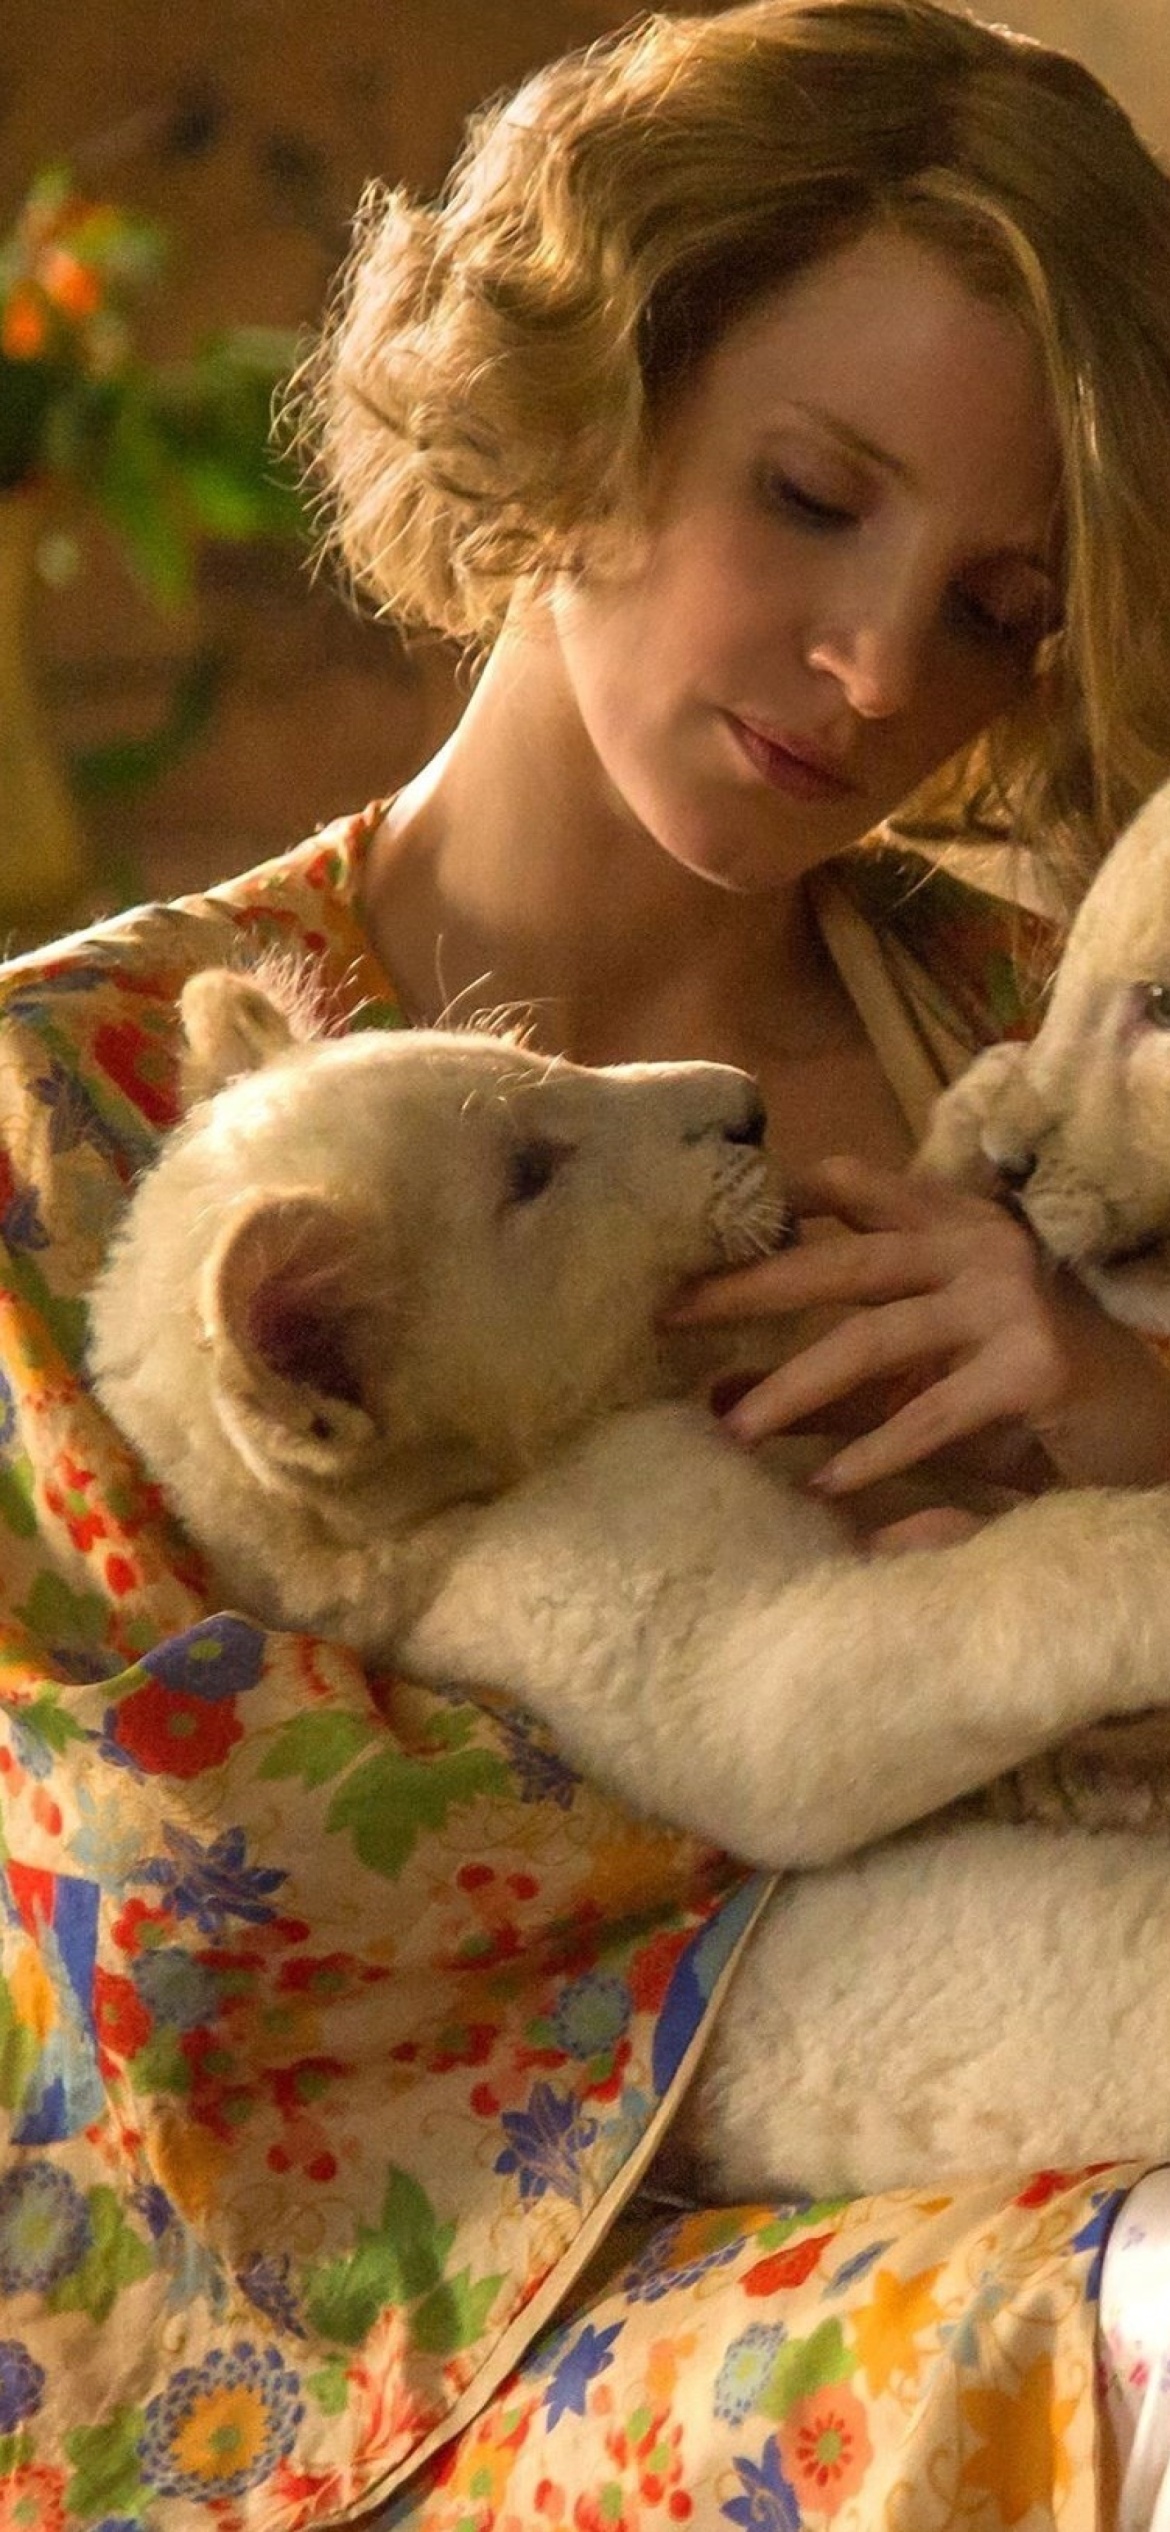 The Zookeepers Wife Film with Jessica Chastain screenshot #1 1170x2532